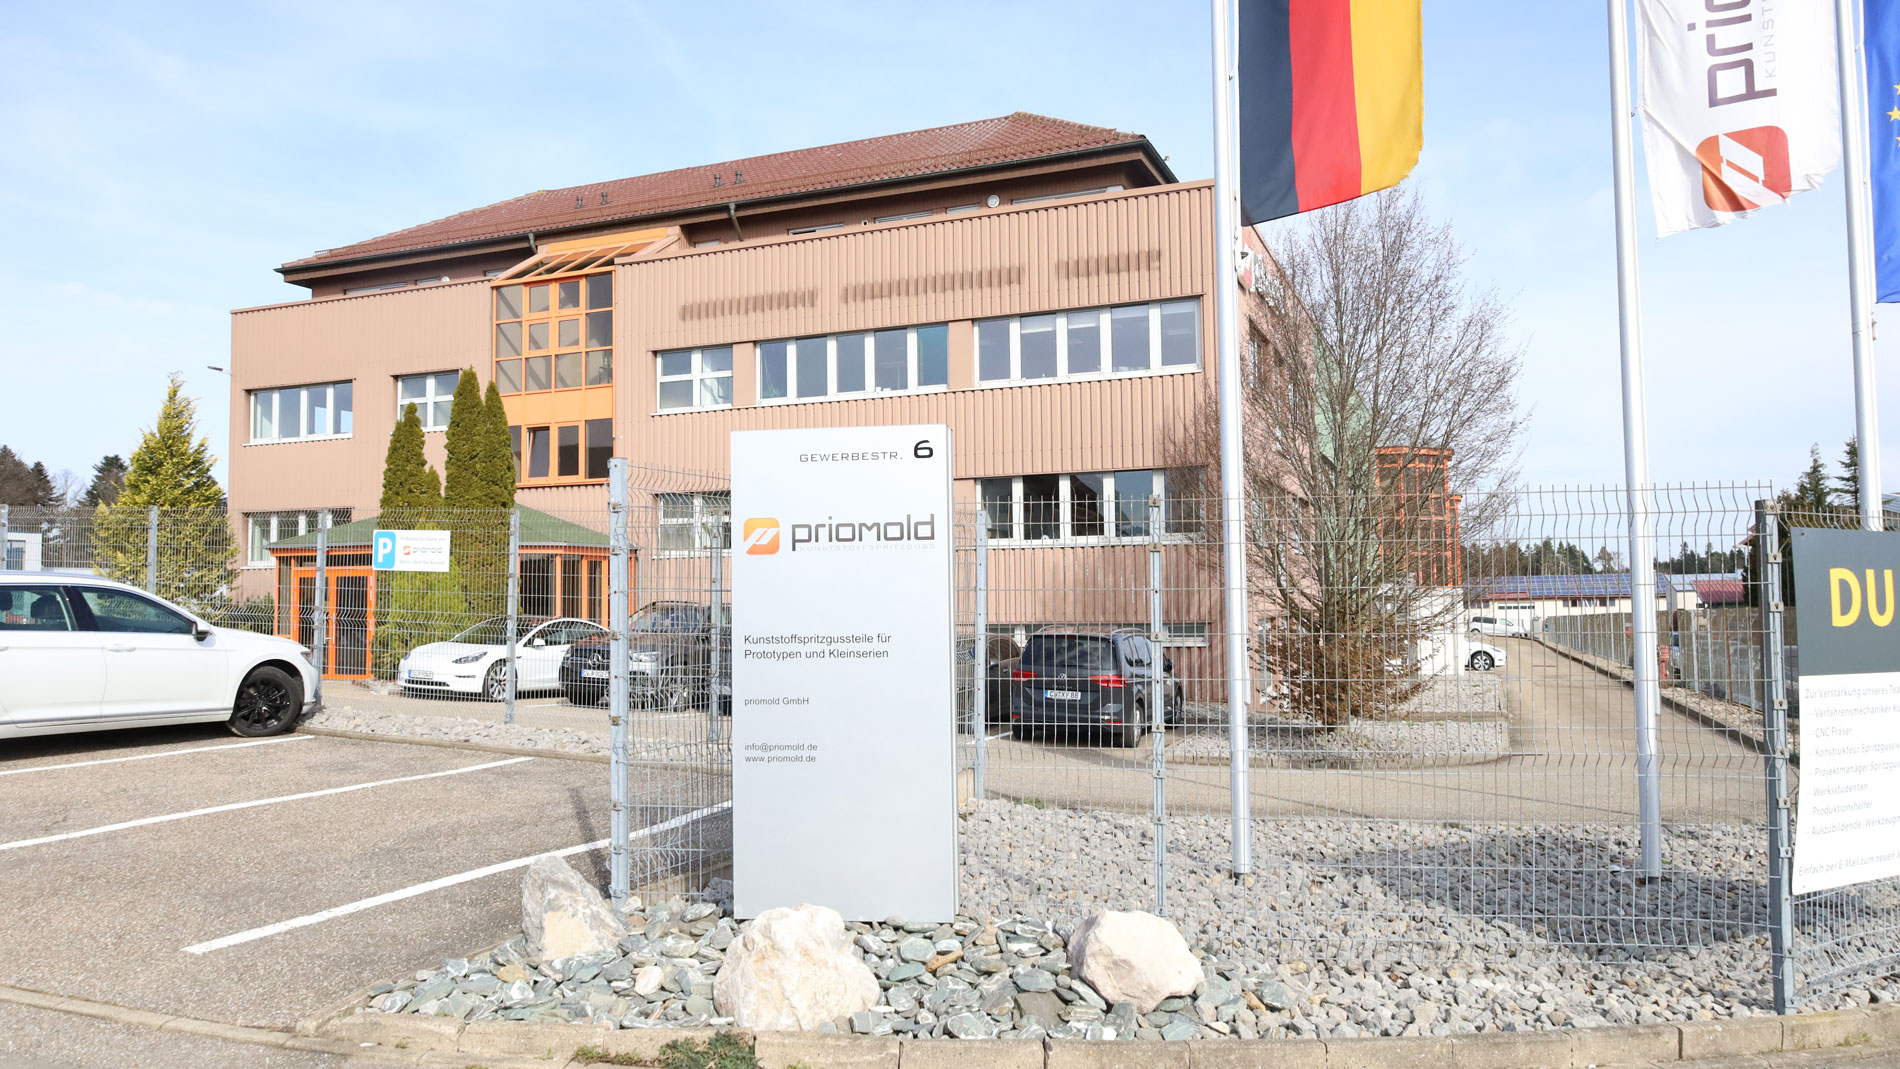 Priomold's headquarters are located in Schömberg, 650 meters above sea level.